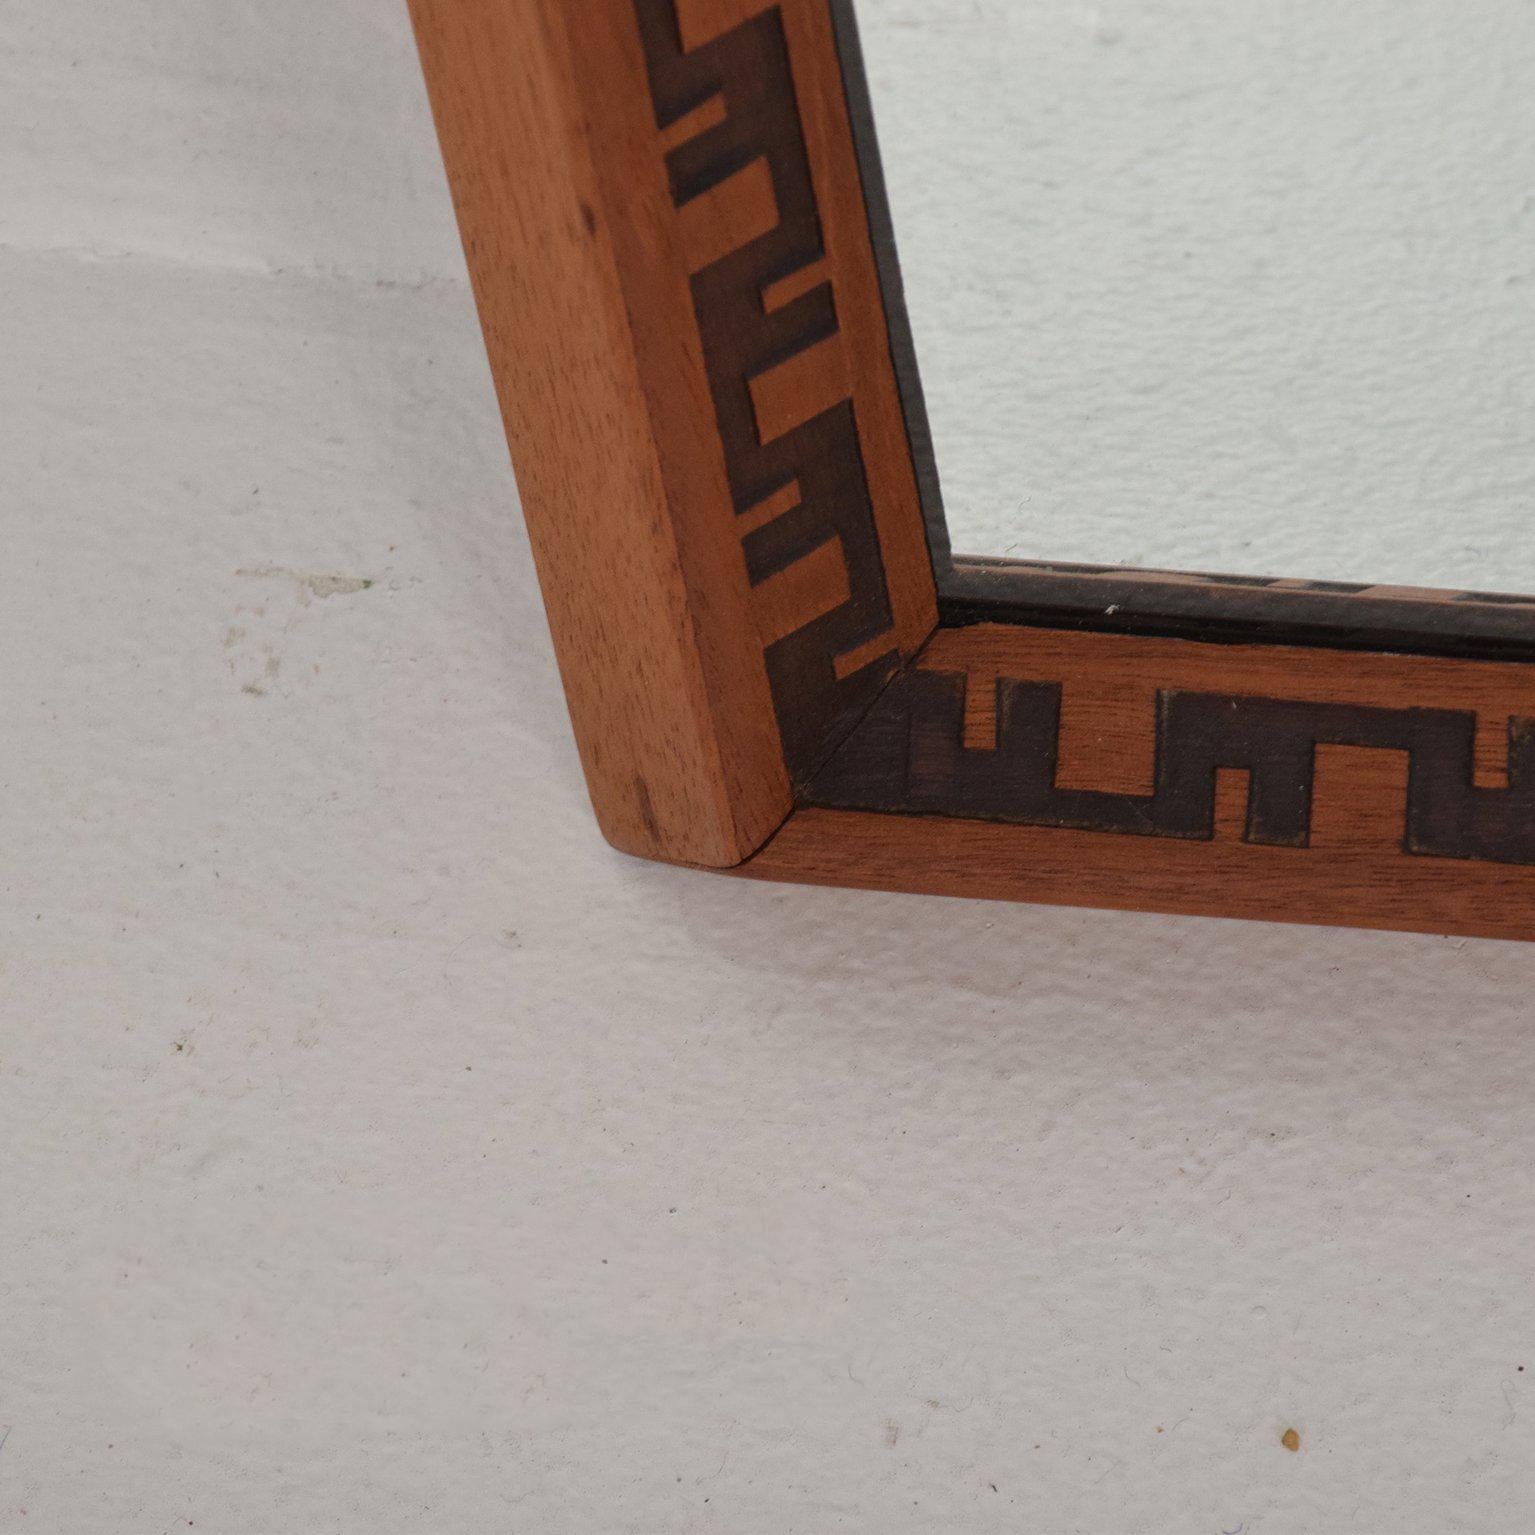 For your consideration a vintage mirror designed by Frank Lloyd Wright. Solid mahogany with iconic design. 
Original mirror has light vintage oxidation. Hard to see, but something that needs to be mentioned. 

USA made, circa 1950s

Measures: